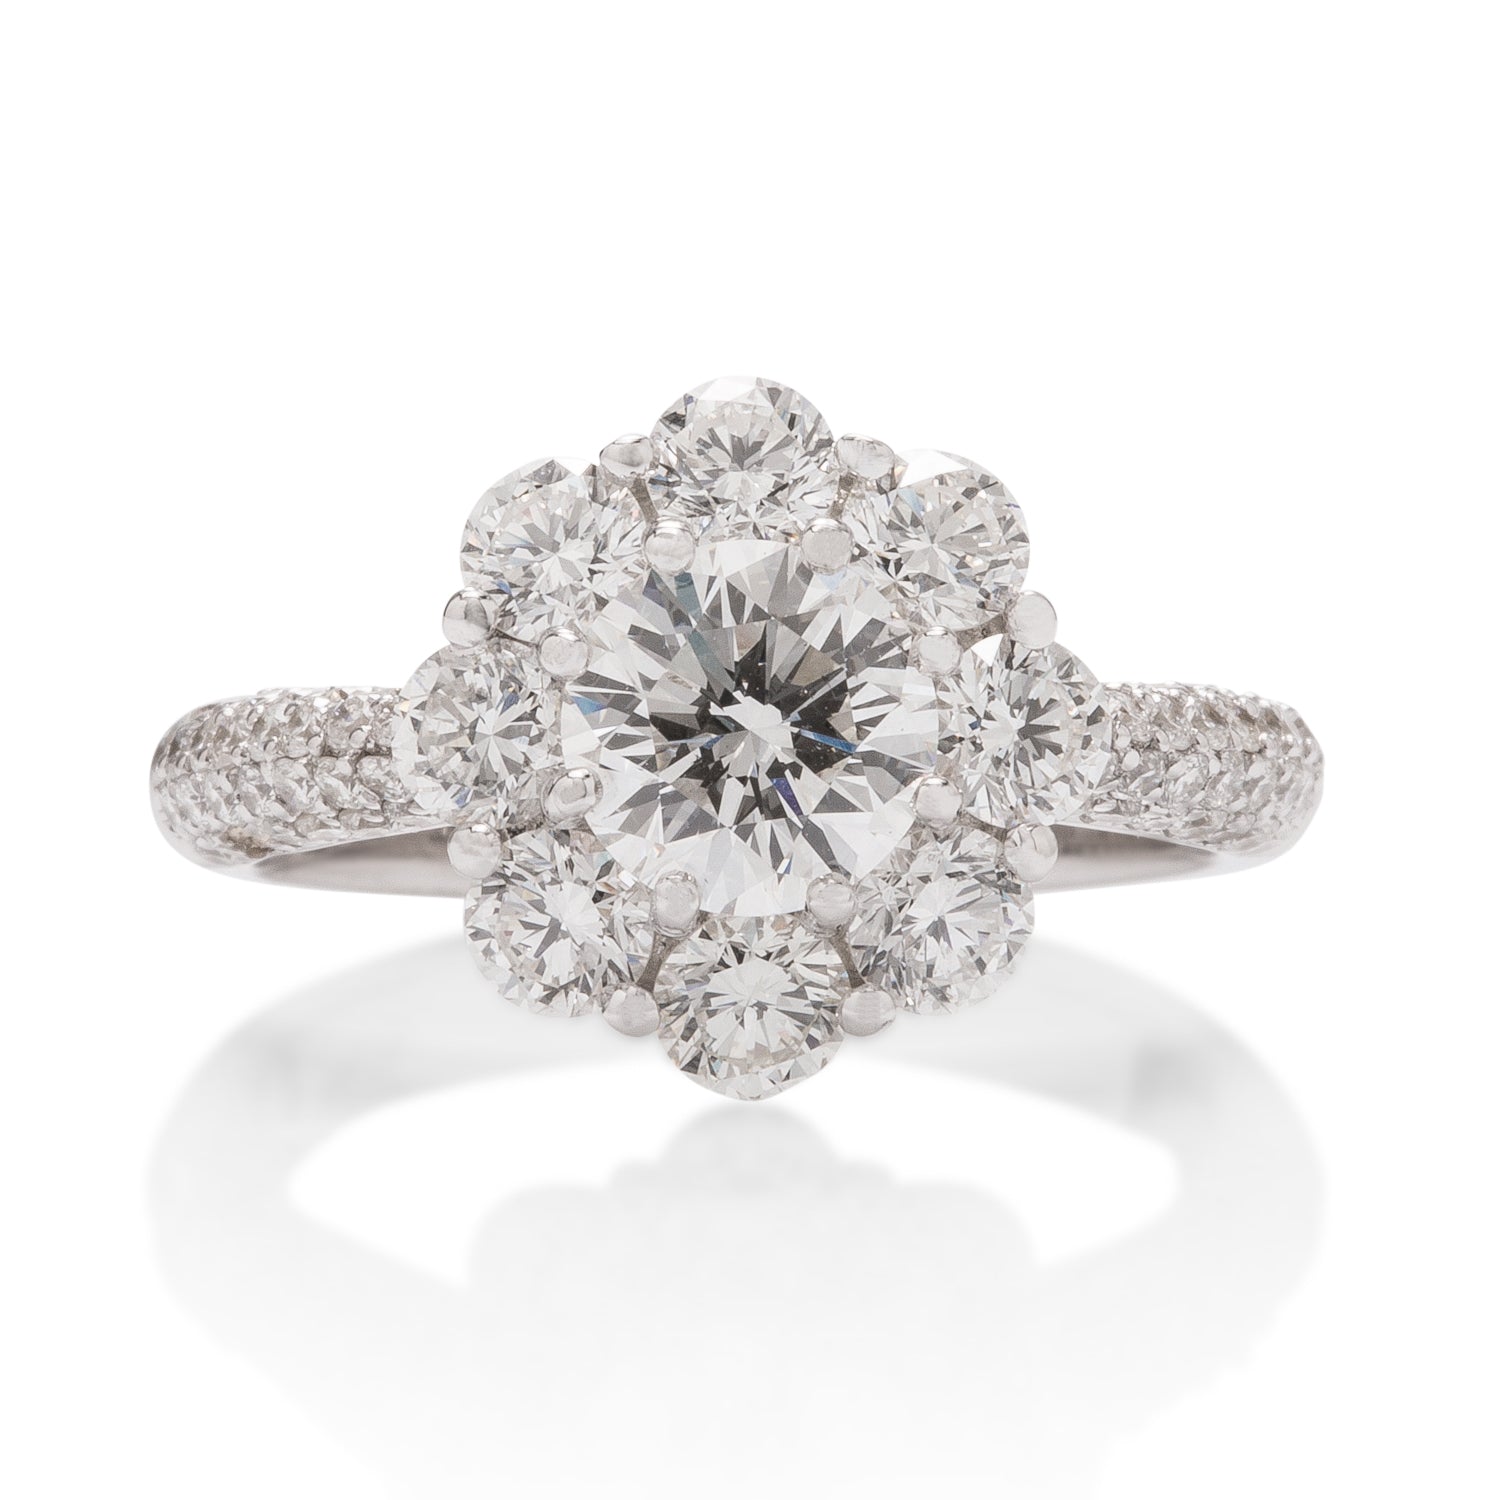 Large Halo Engagement Ring - Charles Koll Jewellers